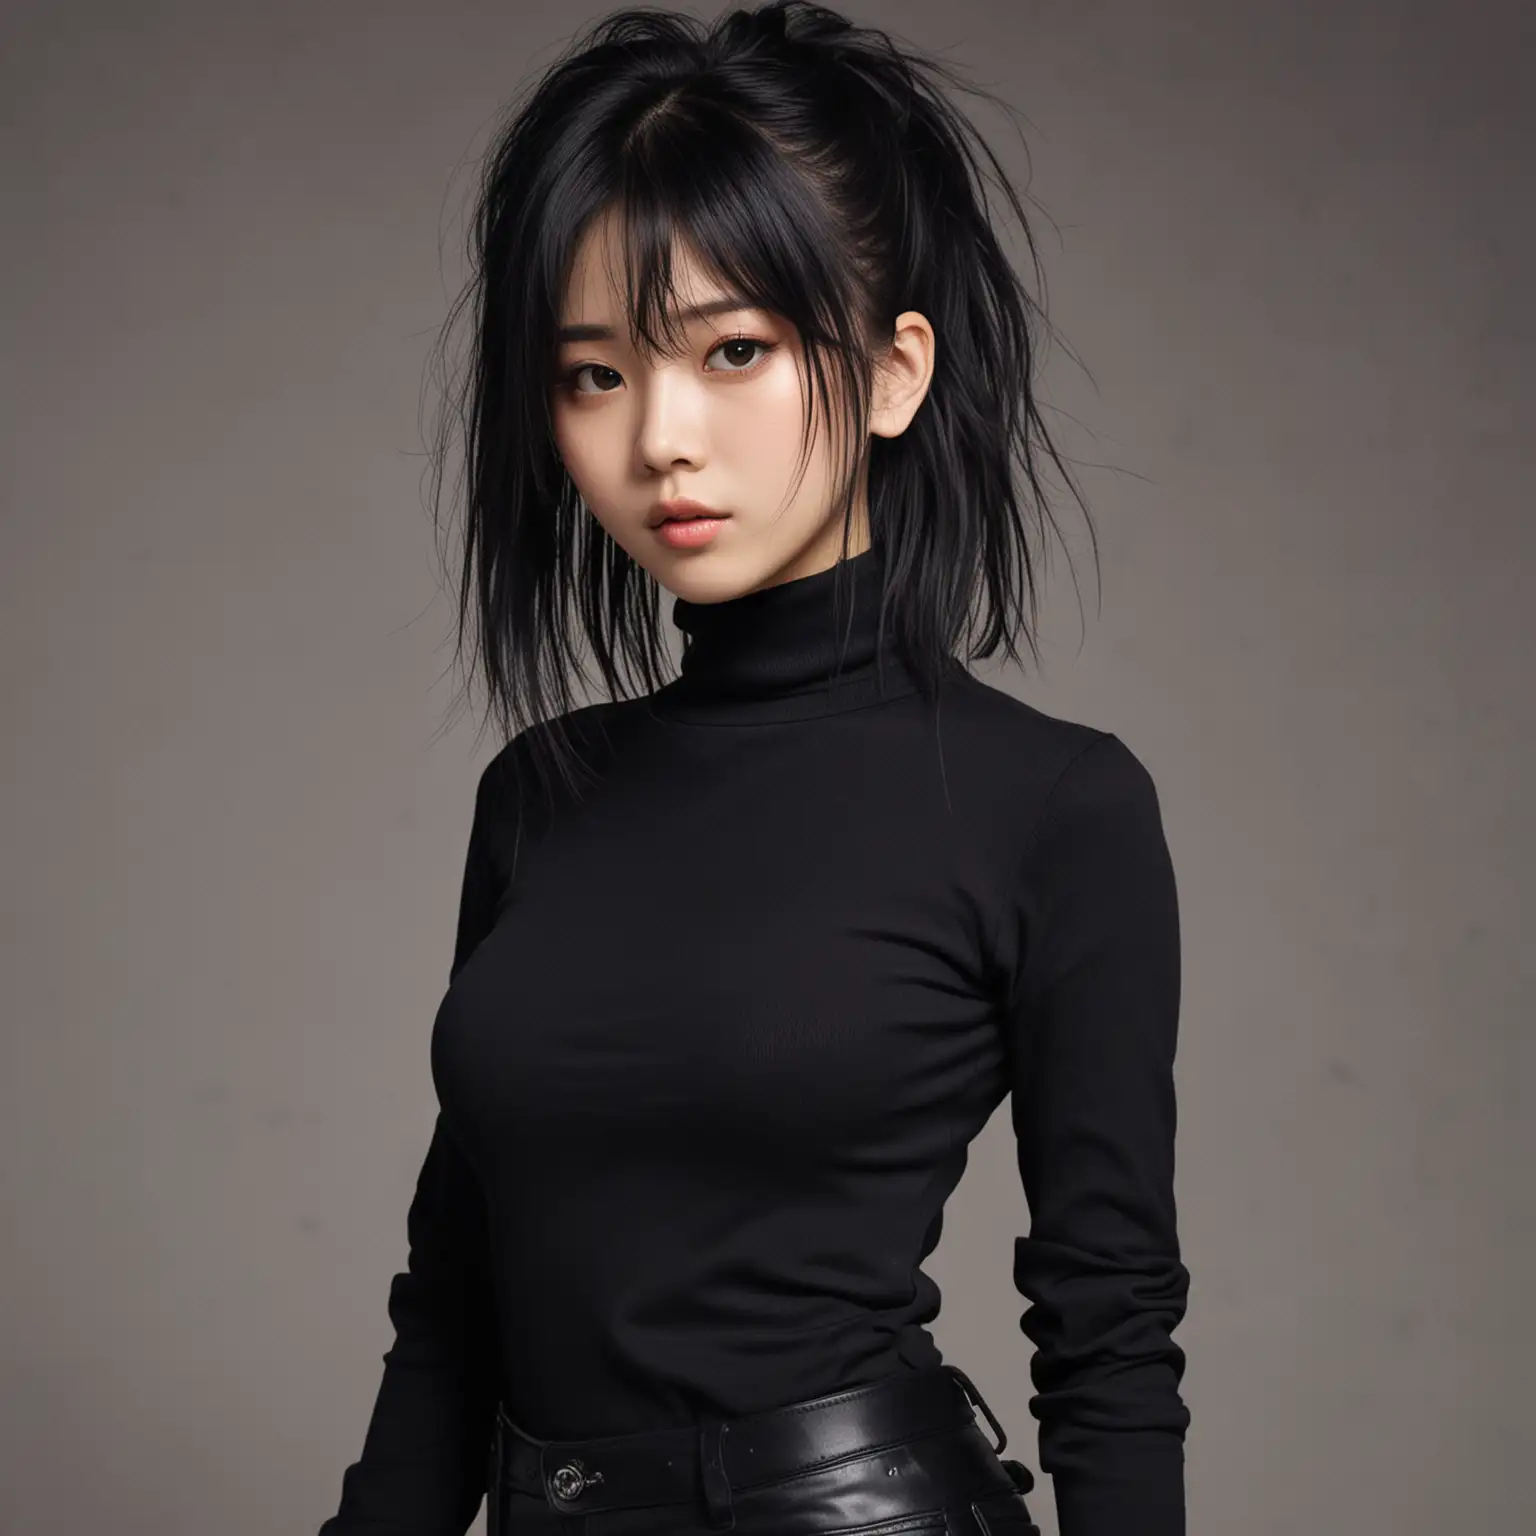 Stylish-Chinese-Girl-in-Black-SlimFit-Suit-and-Sweater-with-AnimeInspired-Hair